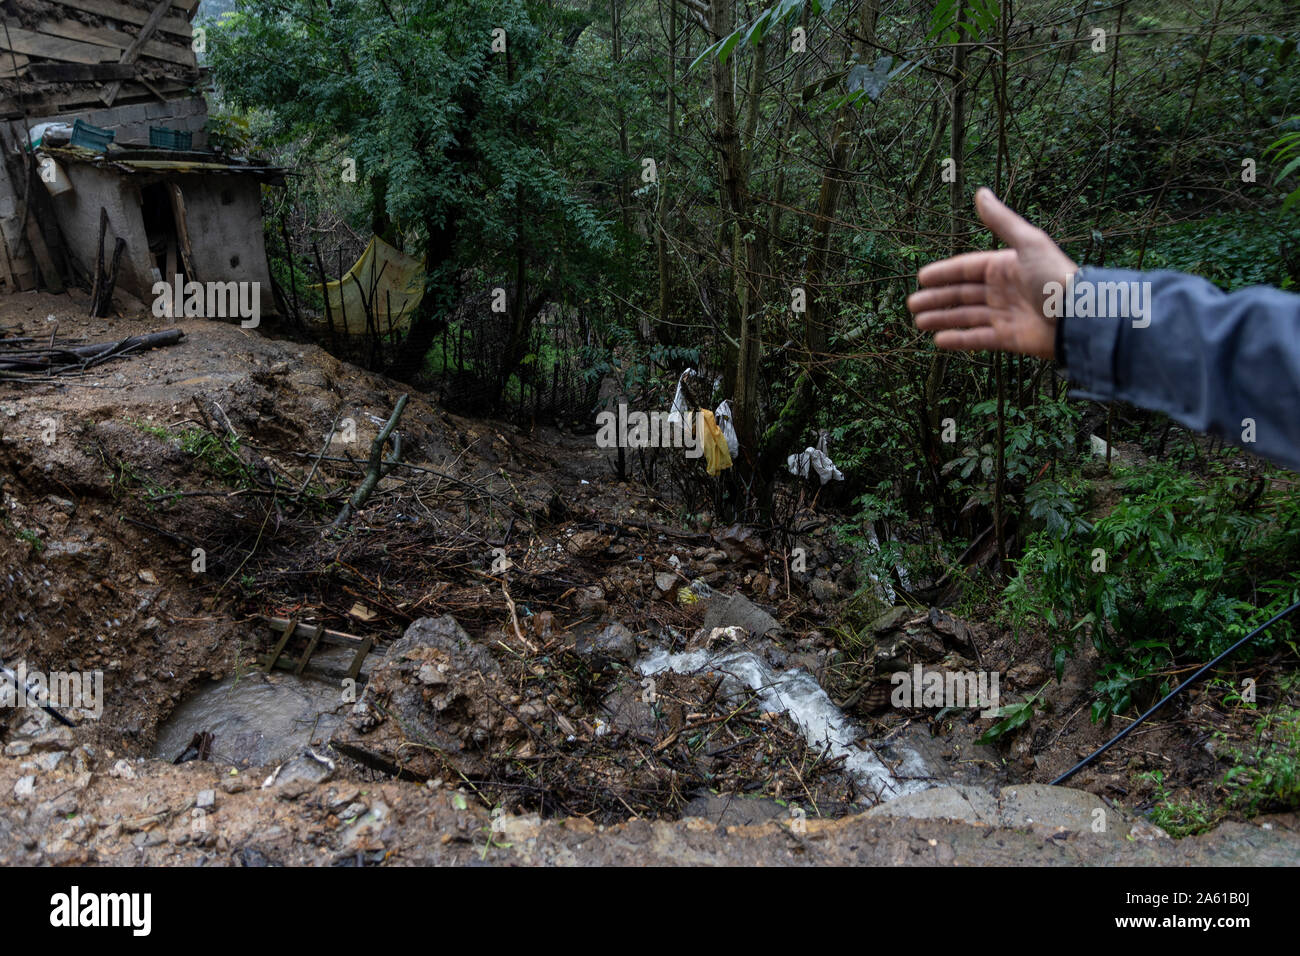 Shaft, Iran. 22nd Oct, 2019. Landslides caused by floods in the village of Visrood.Heavy rains caused landslides and floods in the Shaft city. Several bridges collapsed and roads of the three hundred households of the village of Visrood were blocked. The flood also damaged homes and farms. Shaft is a city in the west of Guilan province. Credit: SOPA Images Limited/Alamy Live News Stock Photo